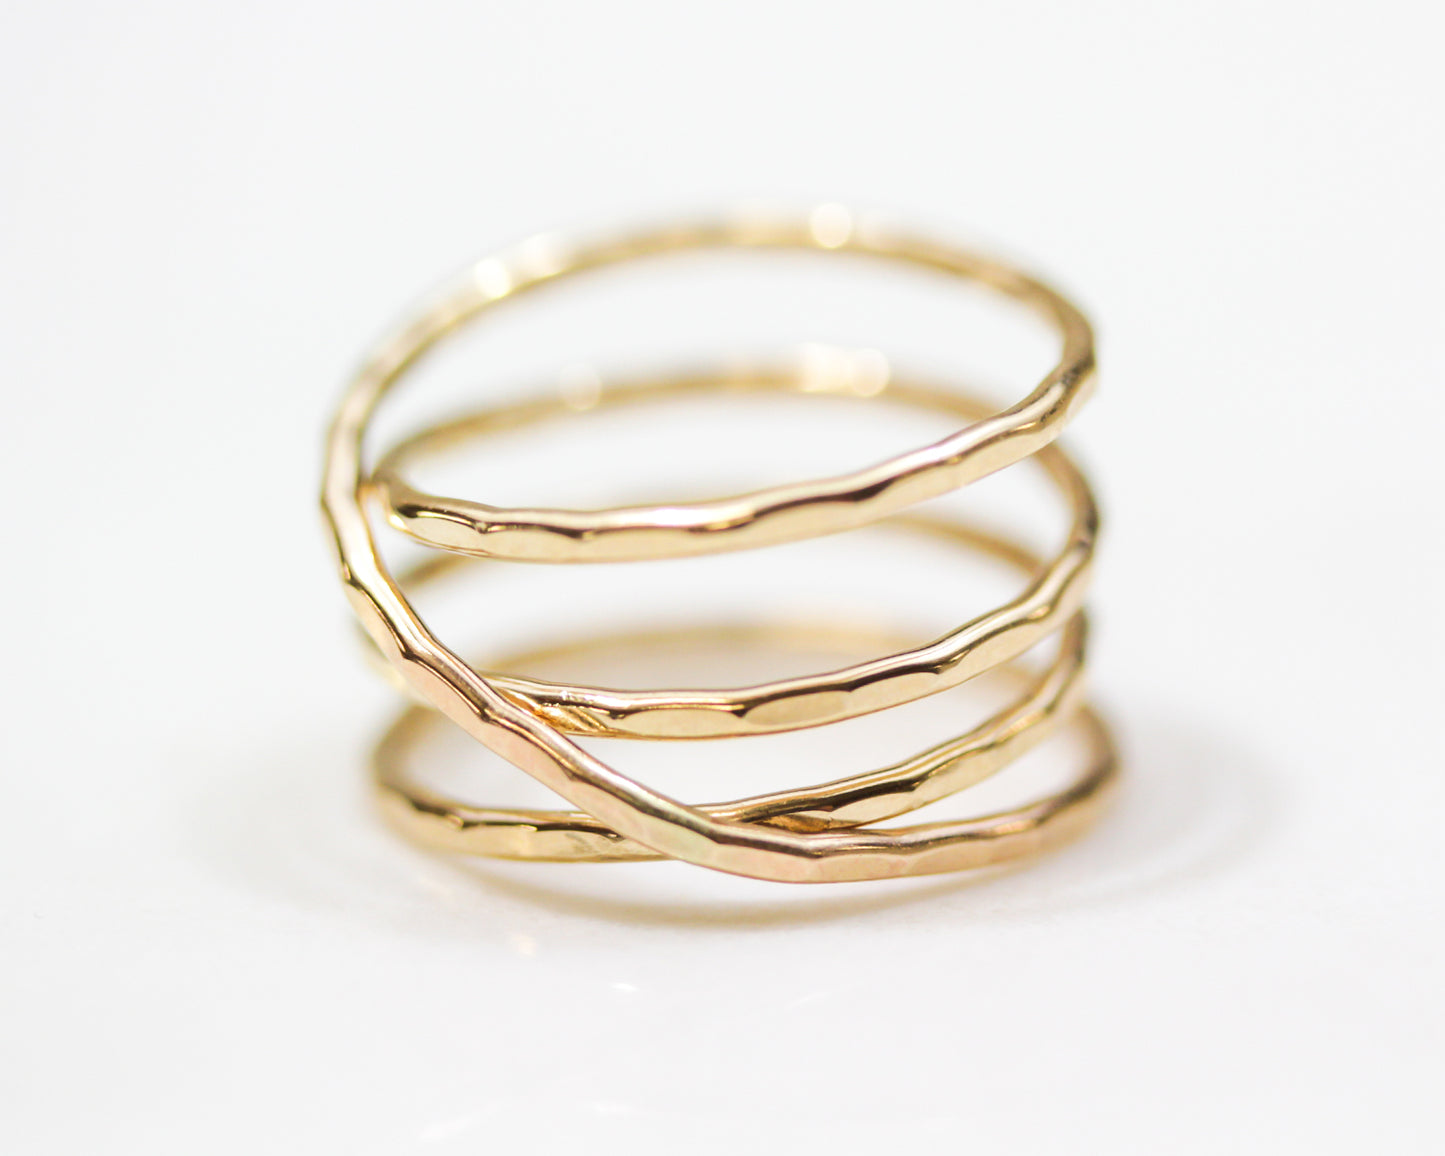 The Helix Wire Wrap Fine Metal Ring